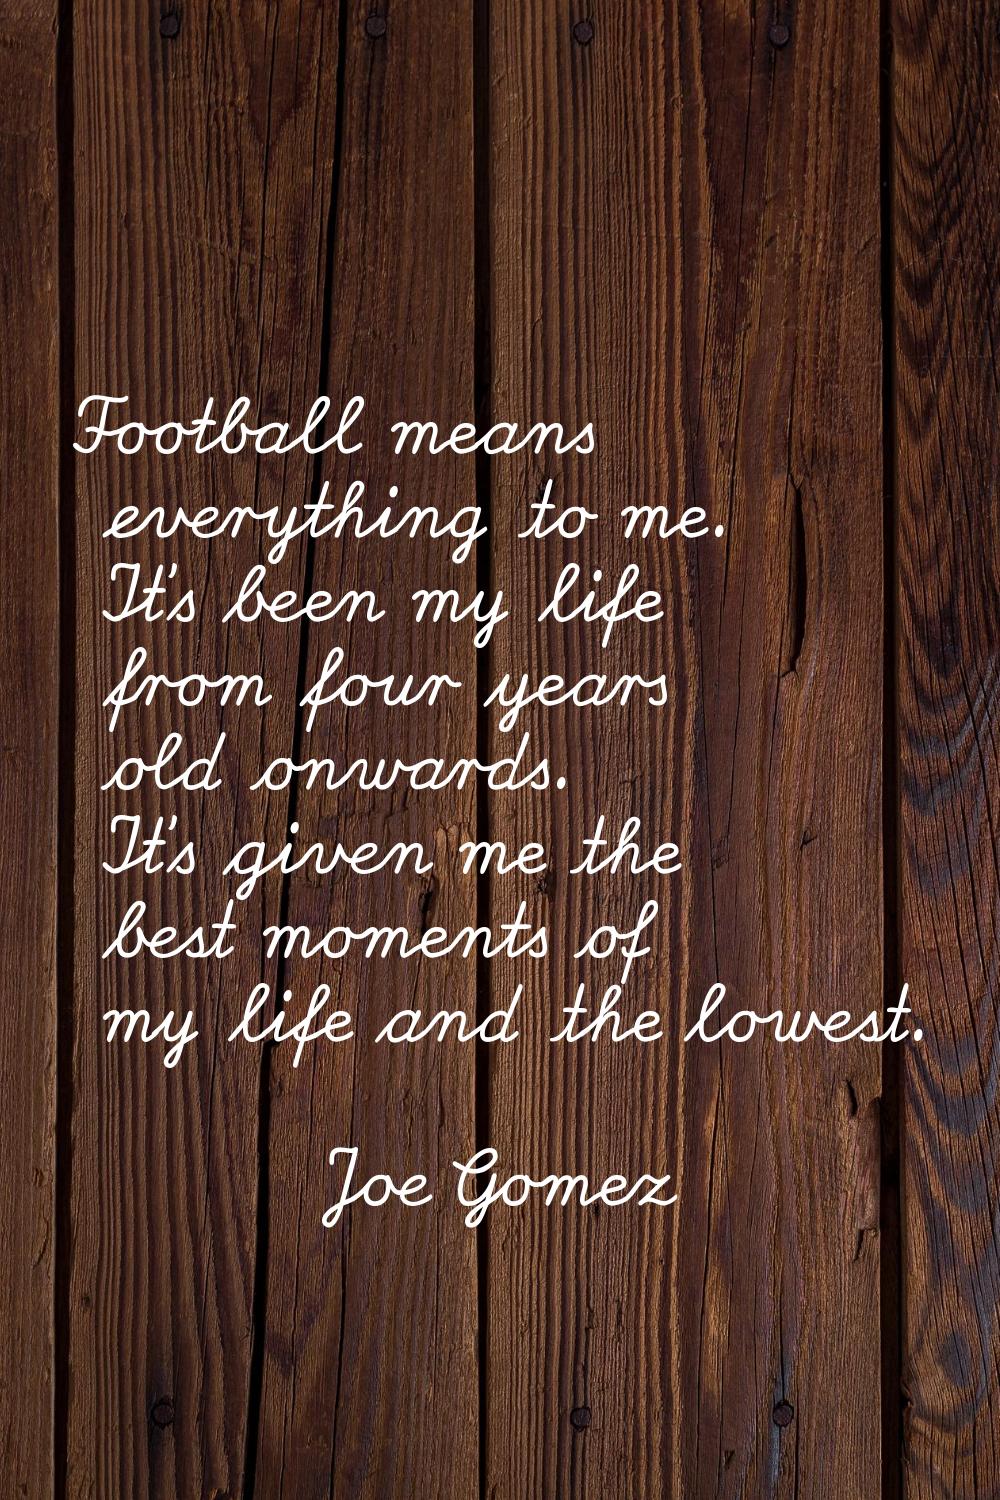 Football means everything to me. It's been my life from four years old onwards. It's given me the b